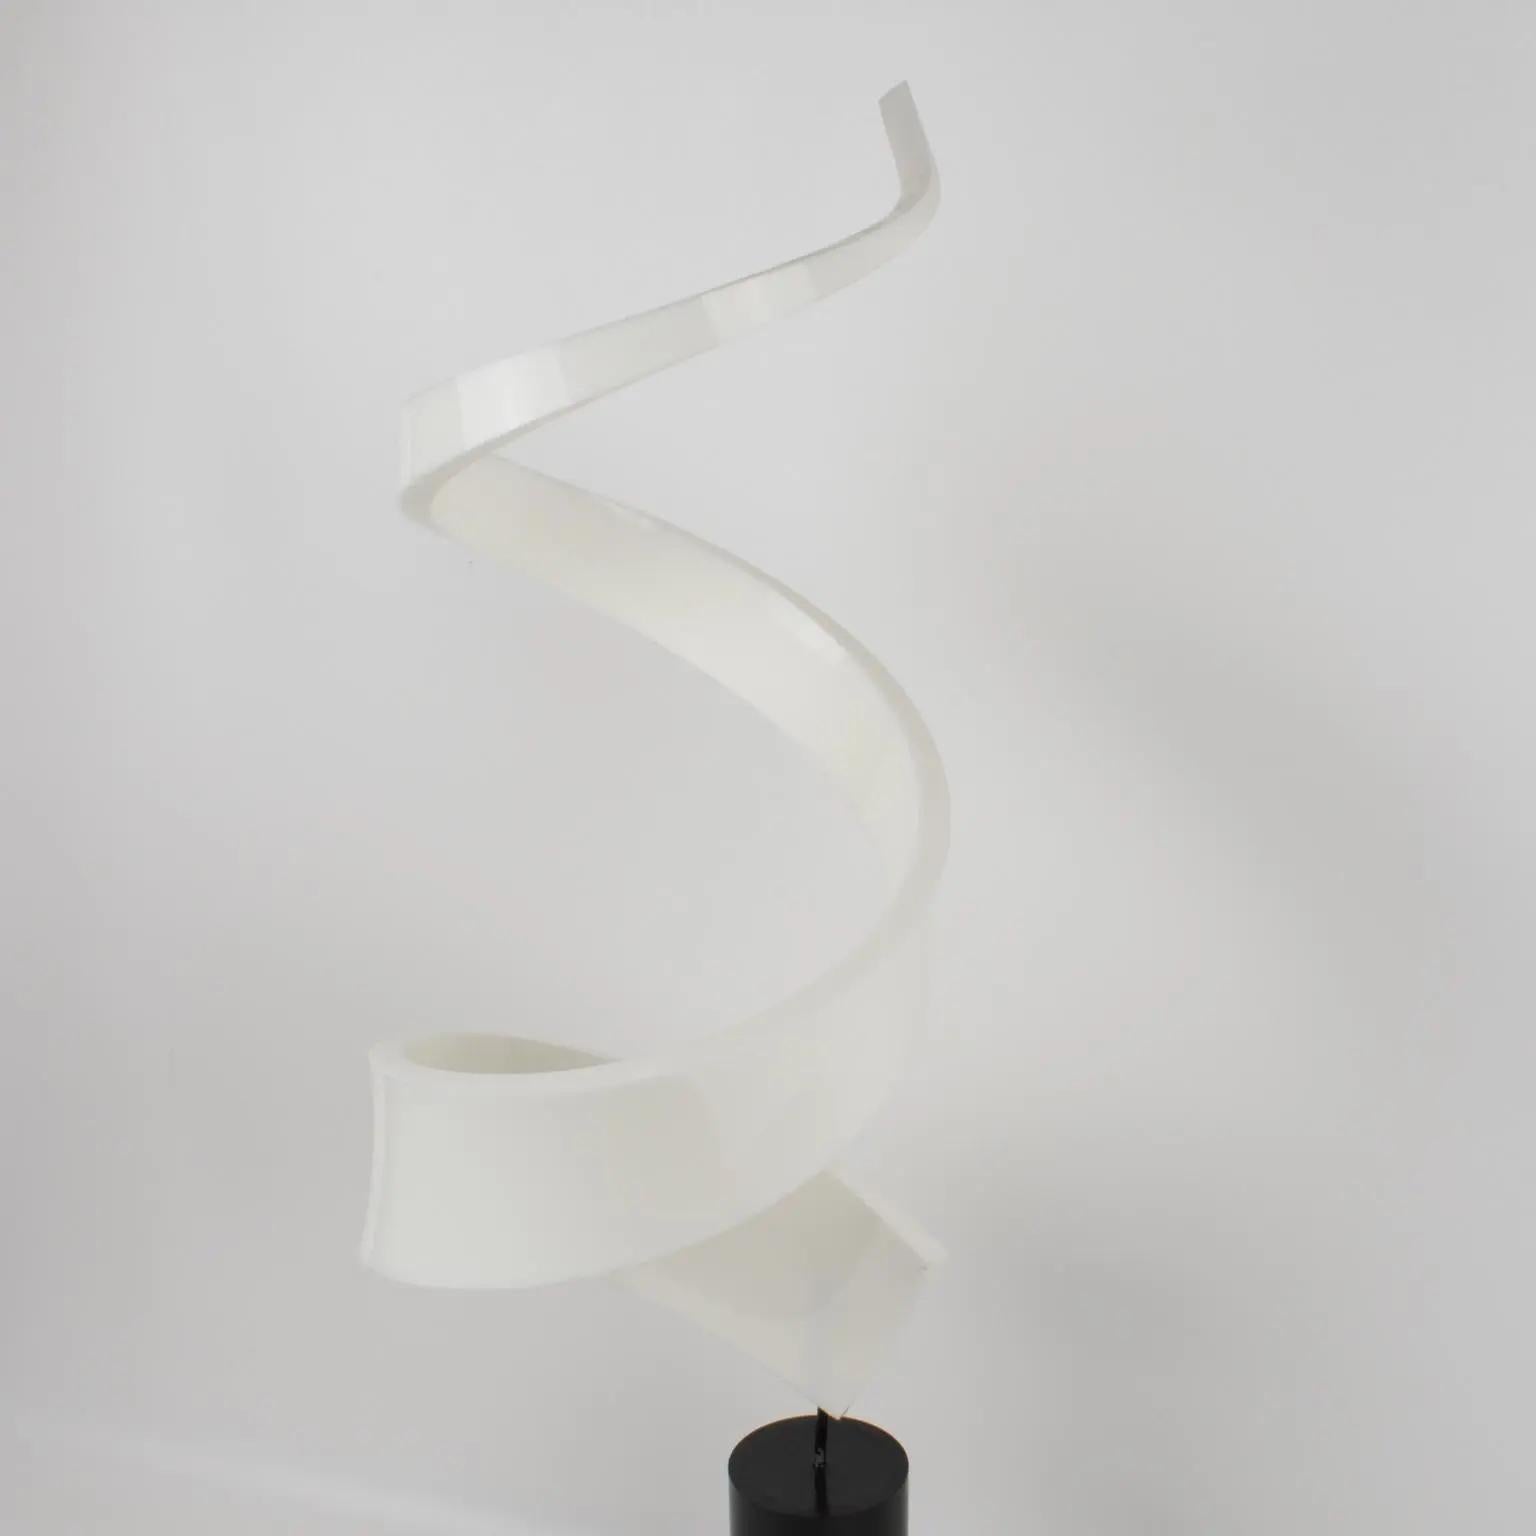 Late 20th Century Mid-Century Modern Abstract White Lucite Swirl Sculpture For Sale